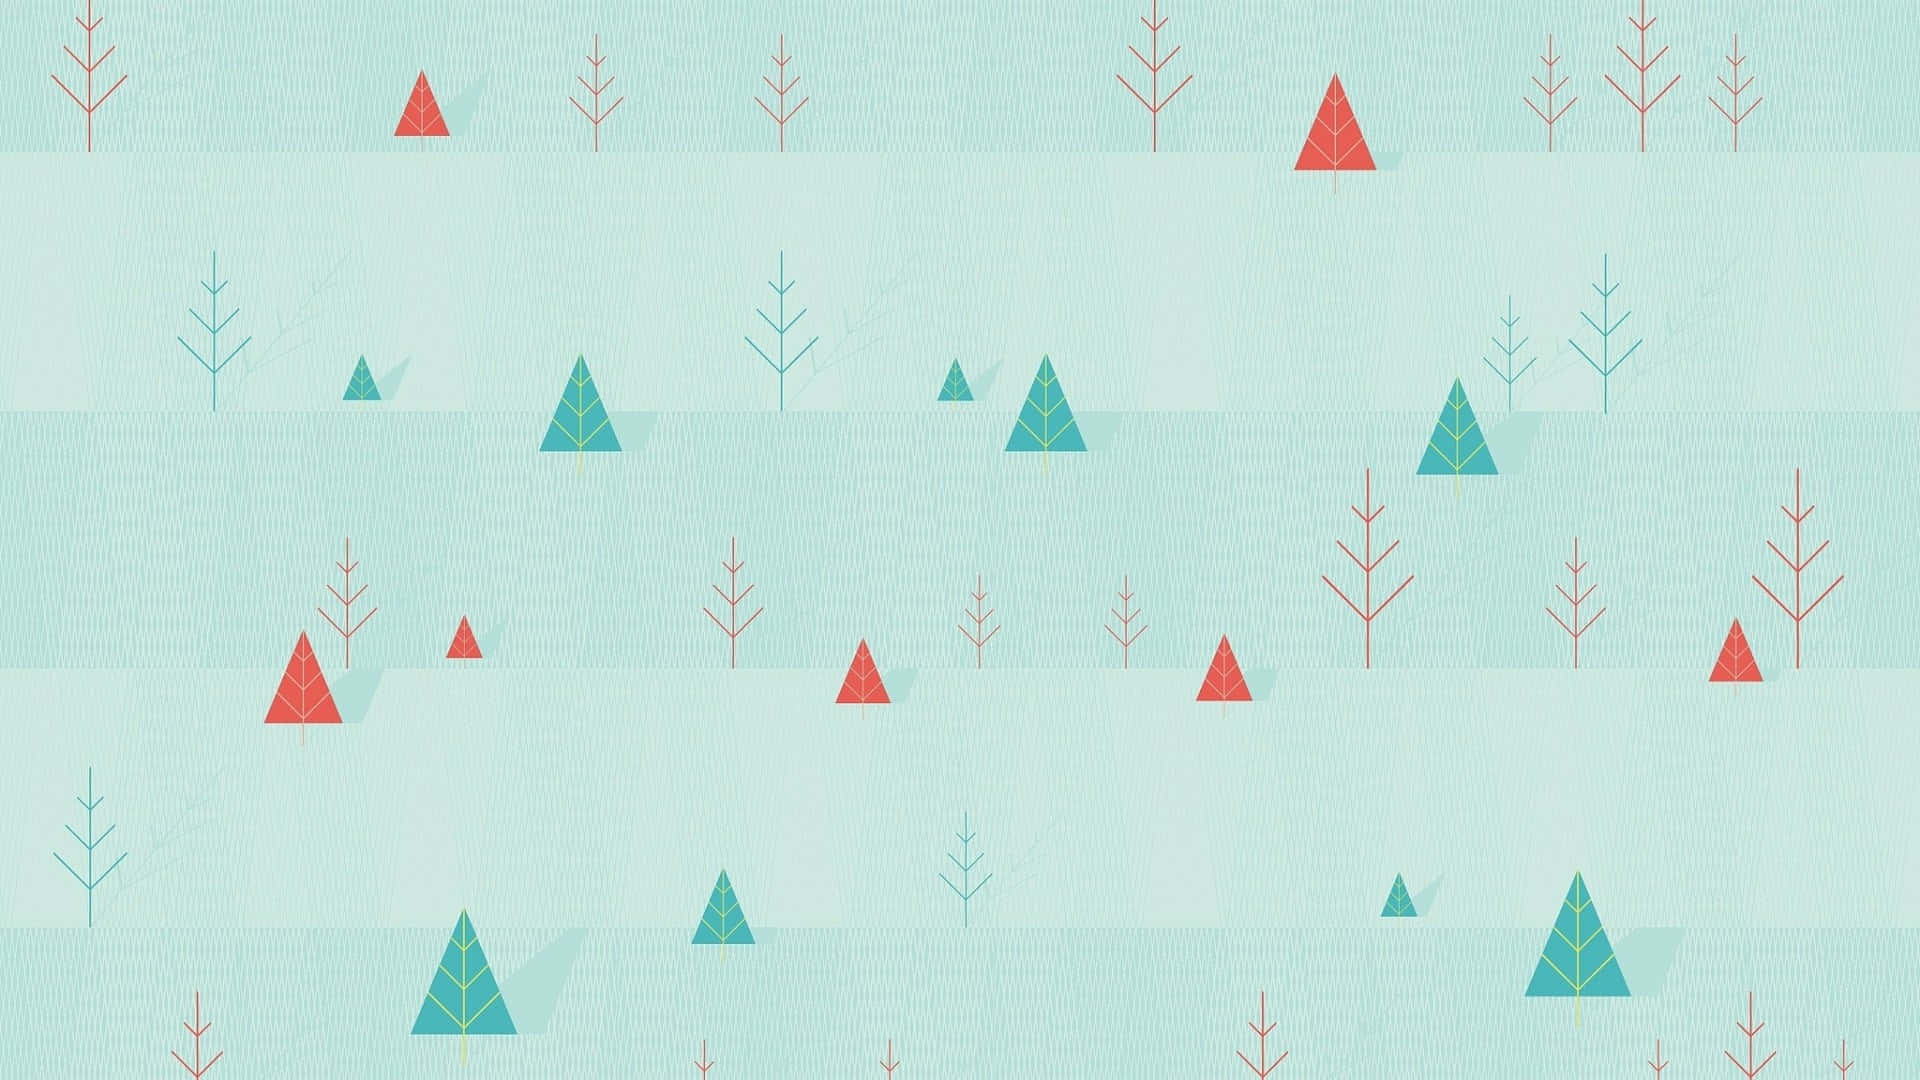 Get into the Holiday Spirit with a Festive Minimalist Christmas Desktop Wallpaper